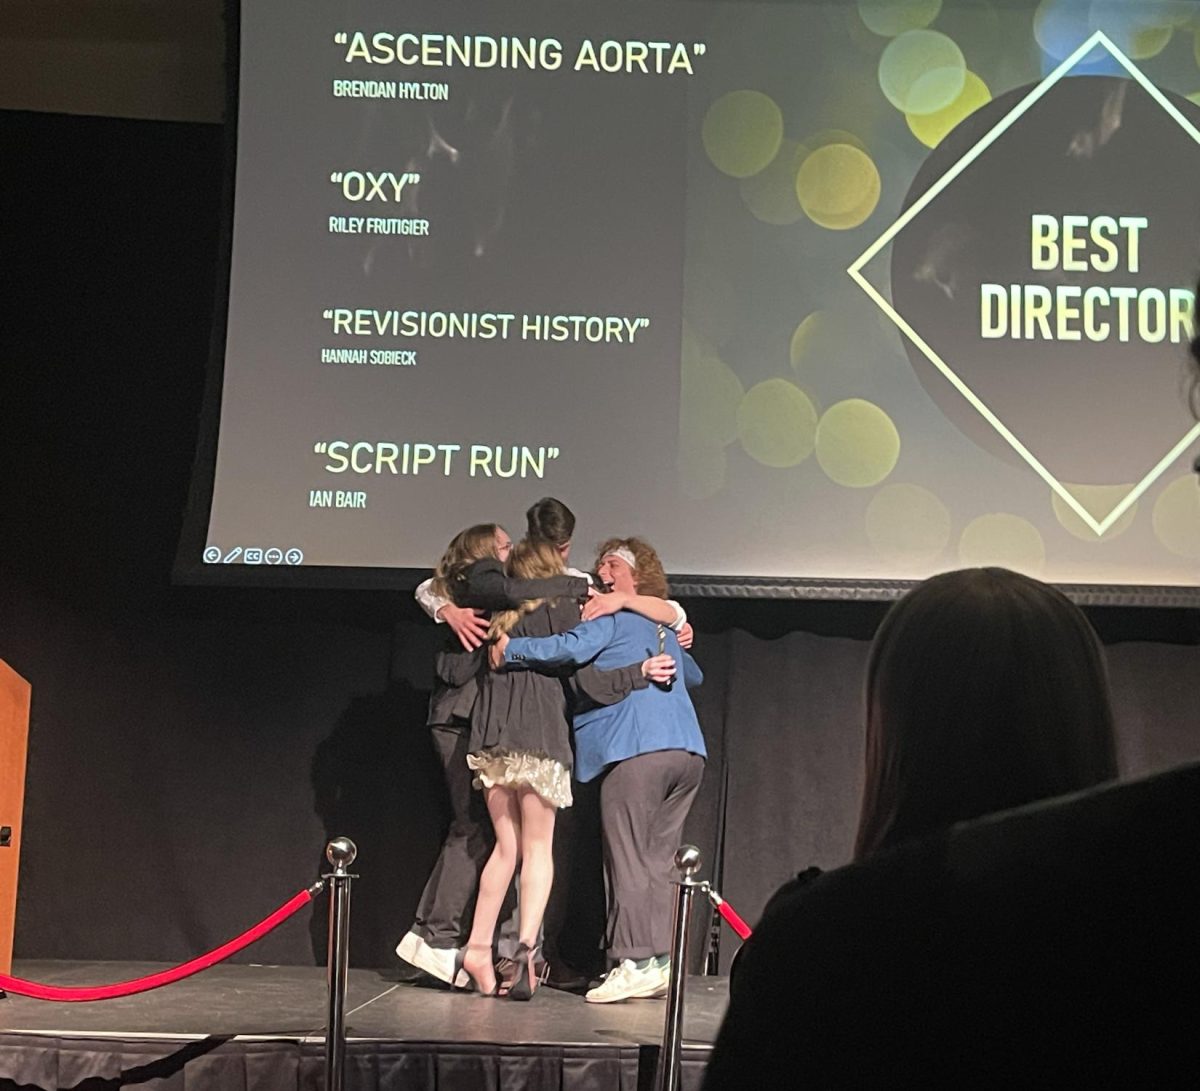 Best Director winner Hannah Sobieck and her crew (Riley Frutiger, Ian Bair, Holt Hendershot, and Andres Johnson) giving a group hug after accepting award.